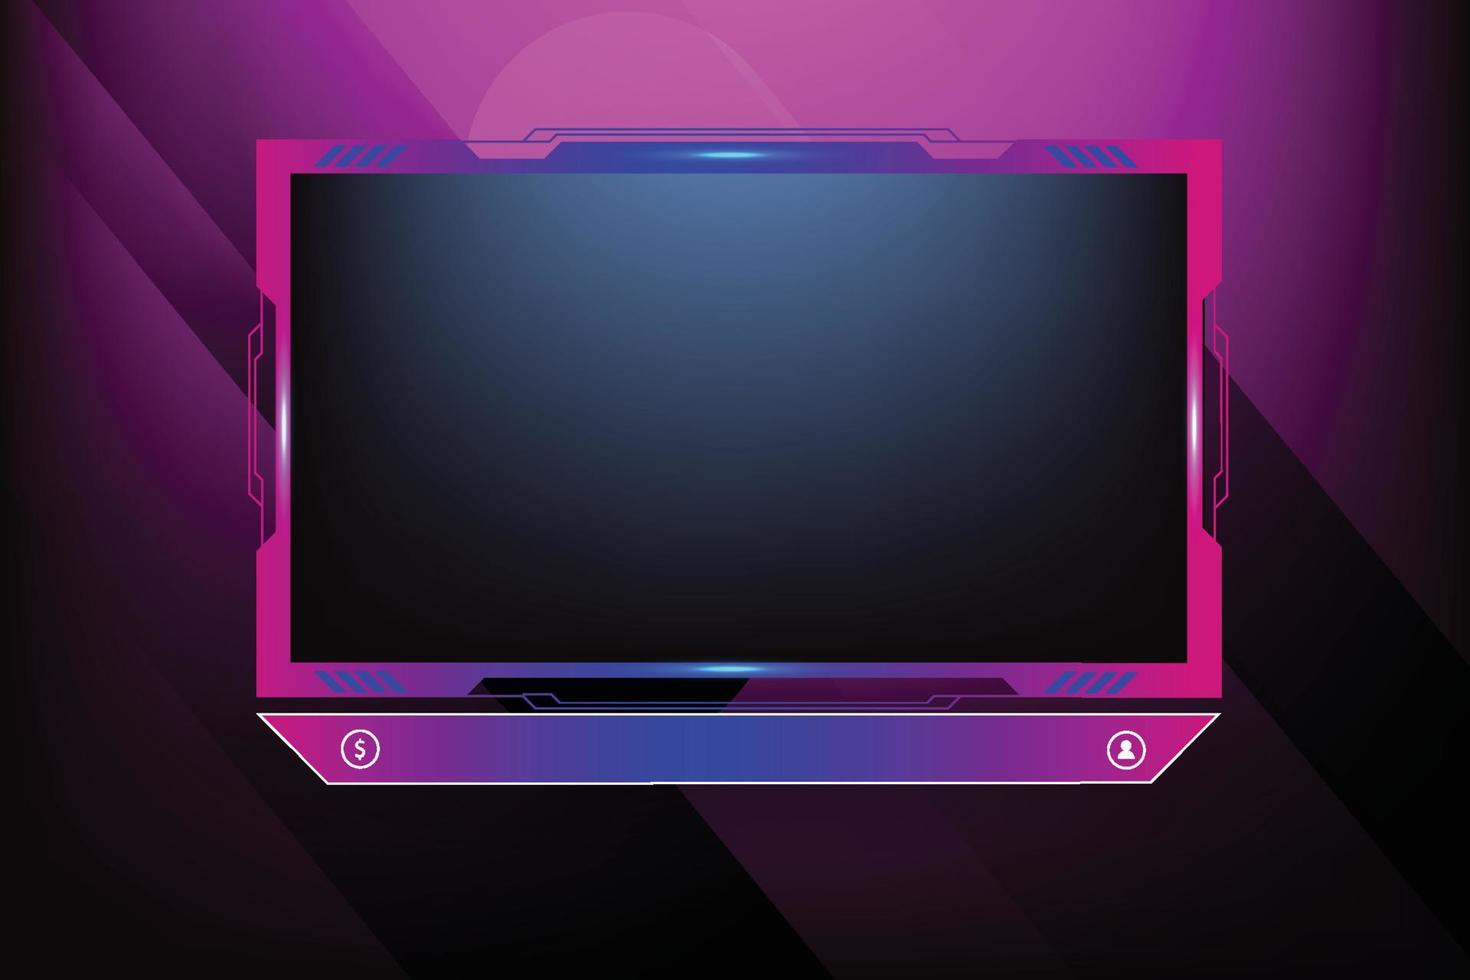 Live streaming overlay decoration with girly pink and blue color shade. Online gaming screen panel and border design for gamers. Live broadcast elements vector with colorful buttons.